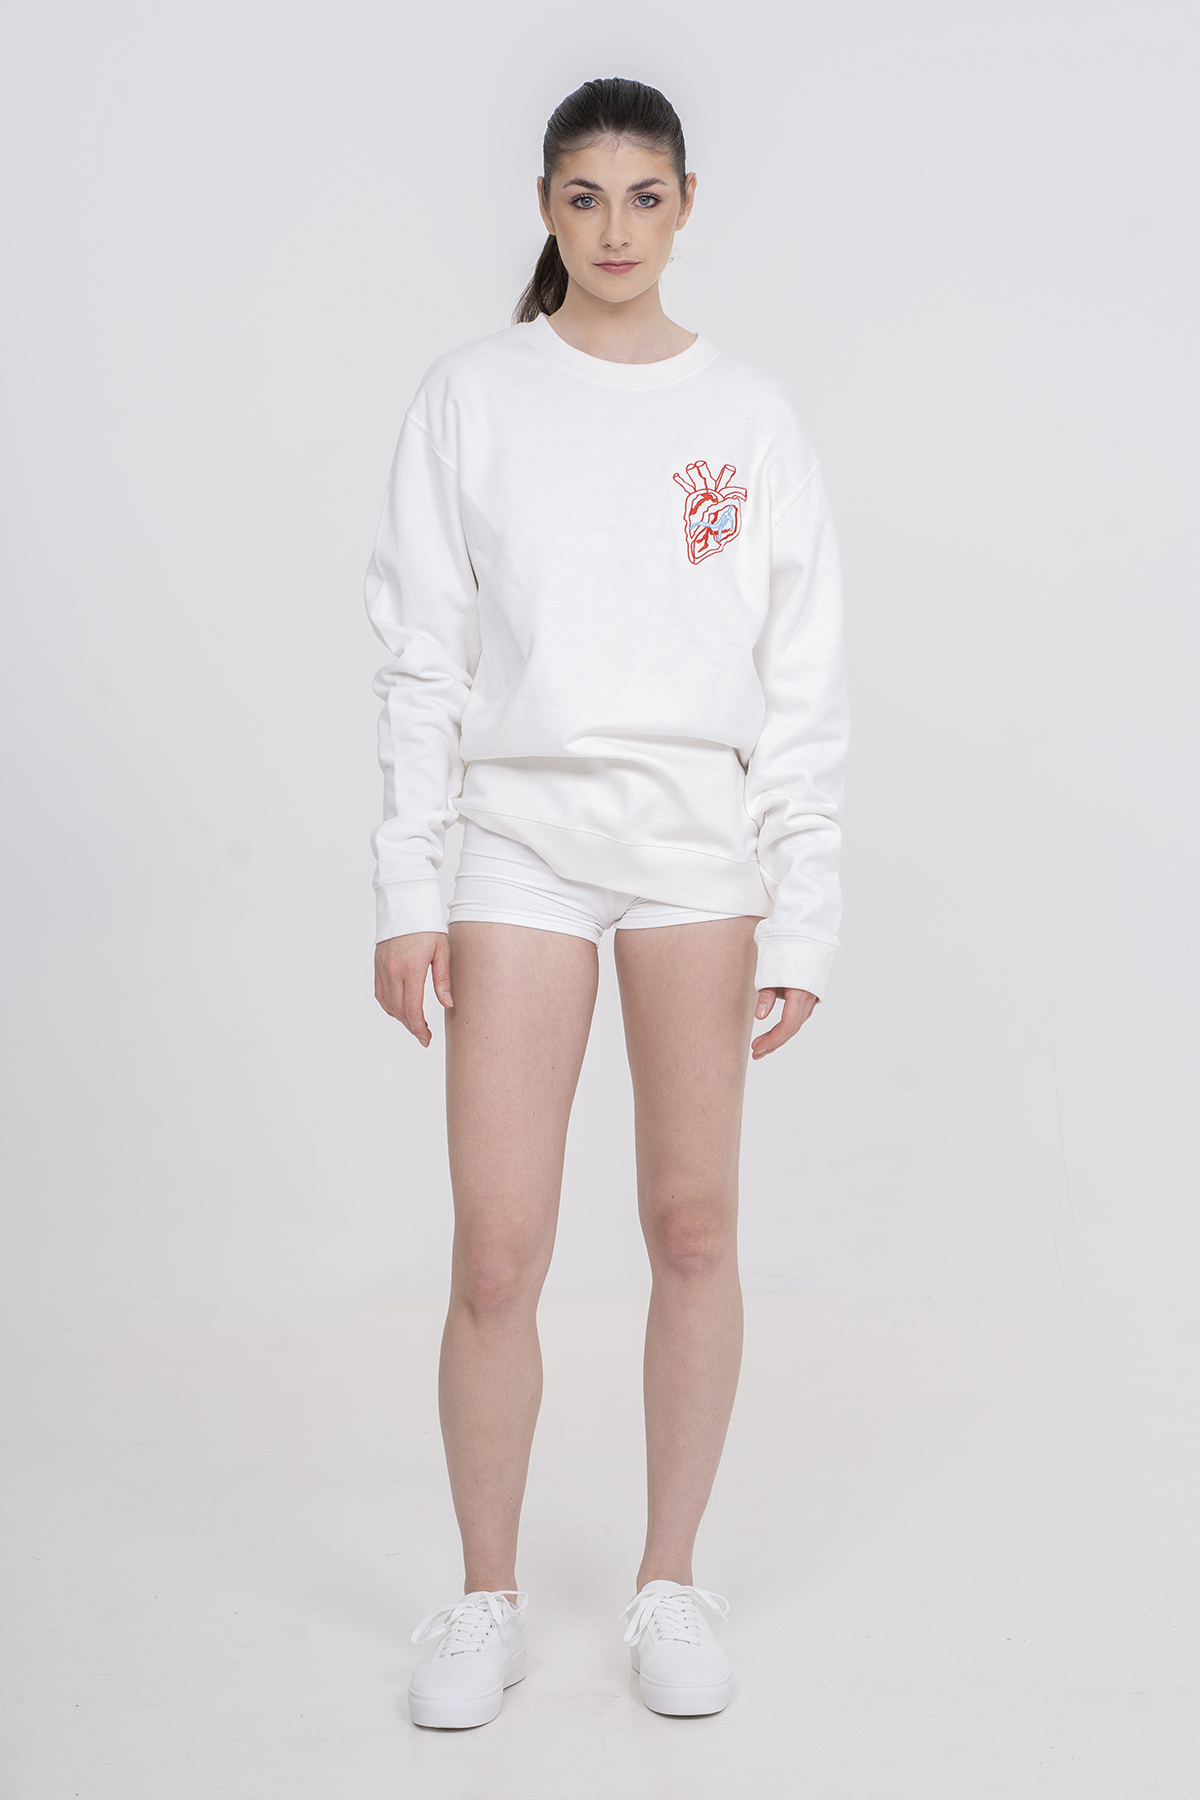 White Crewneck with a Small Heart Embroidered 